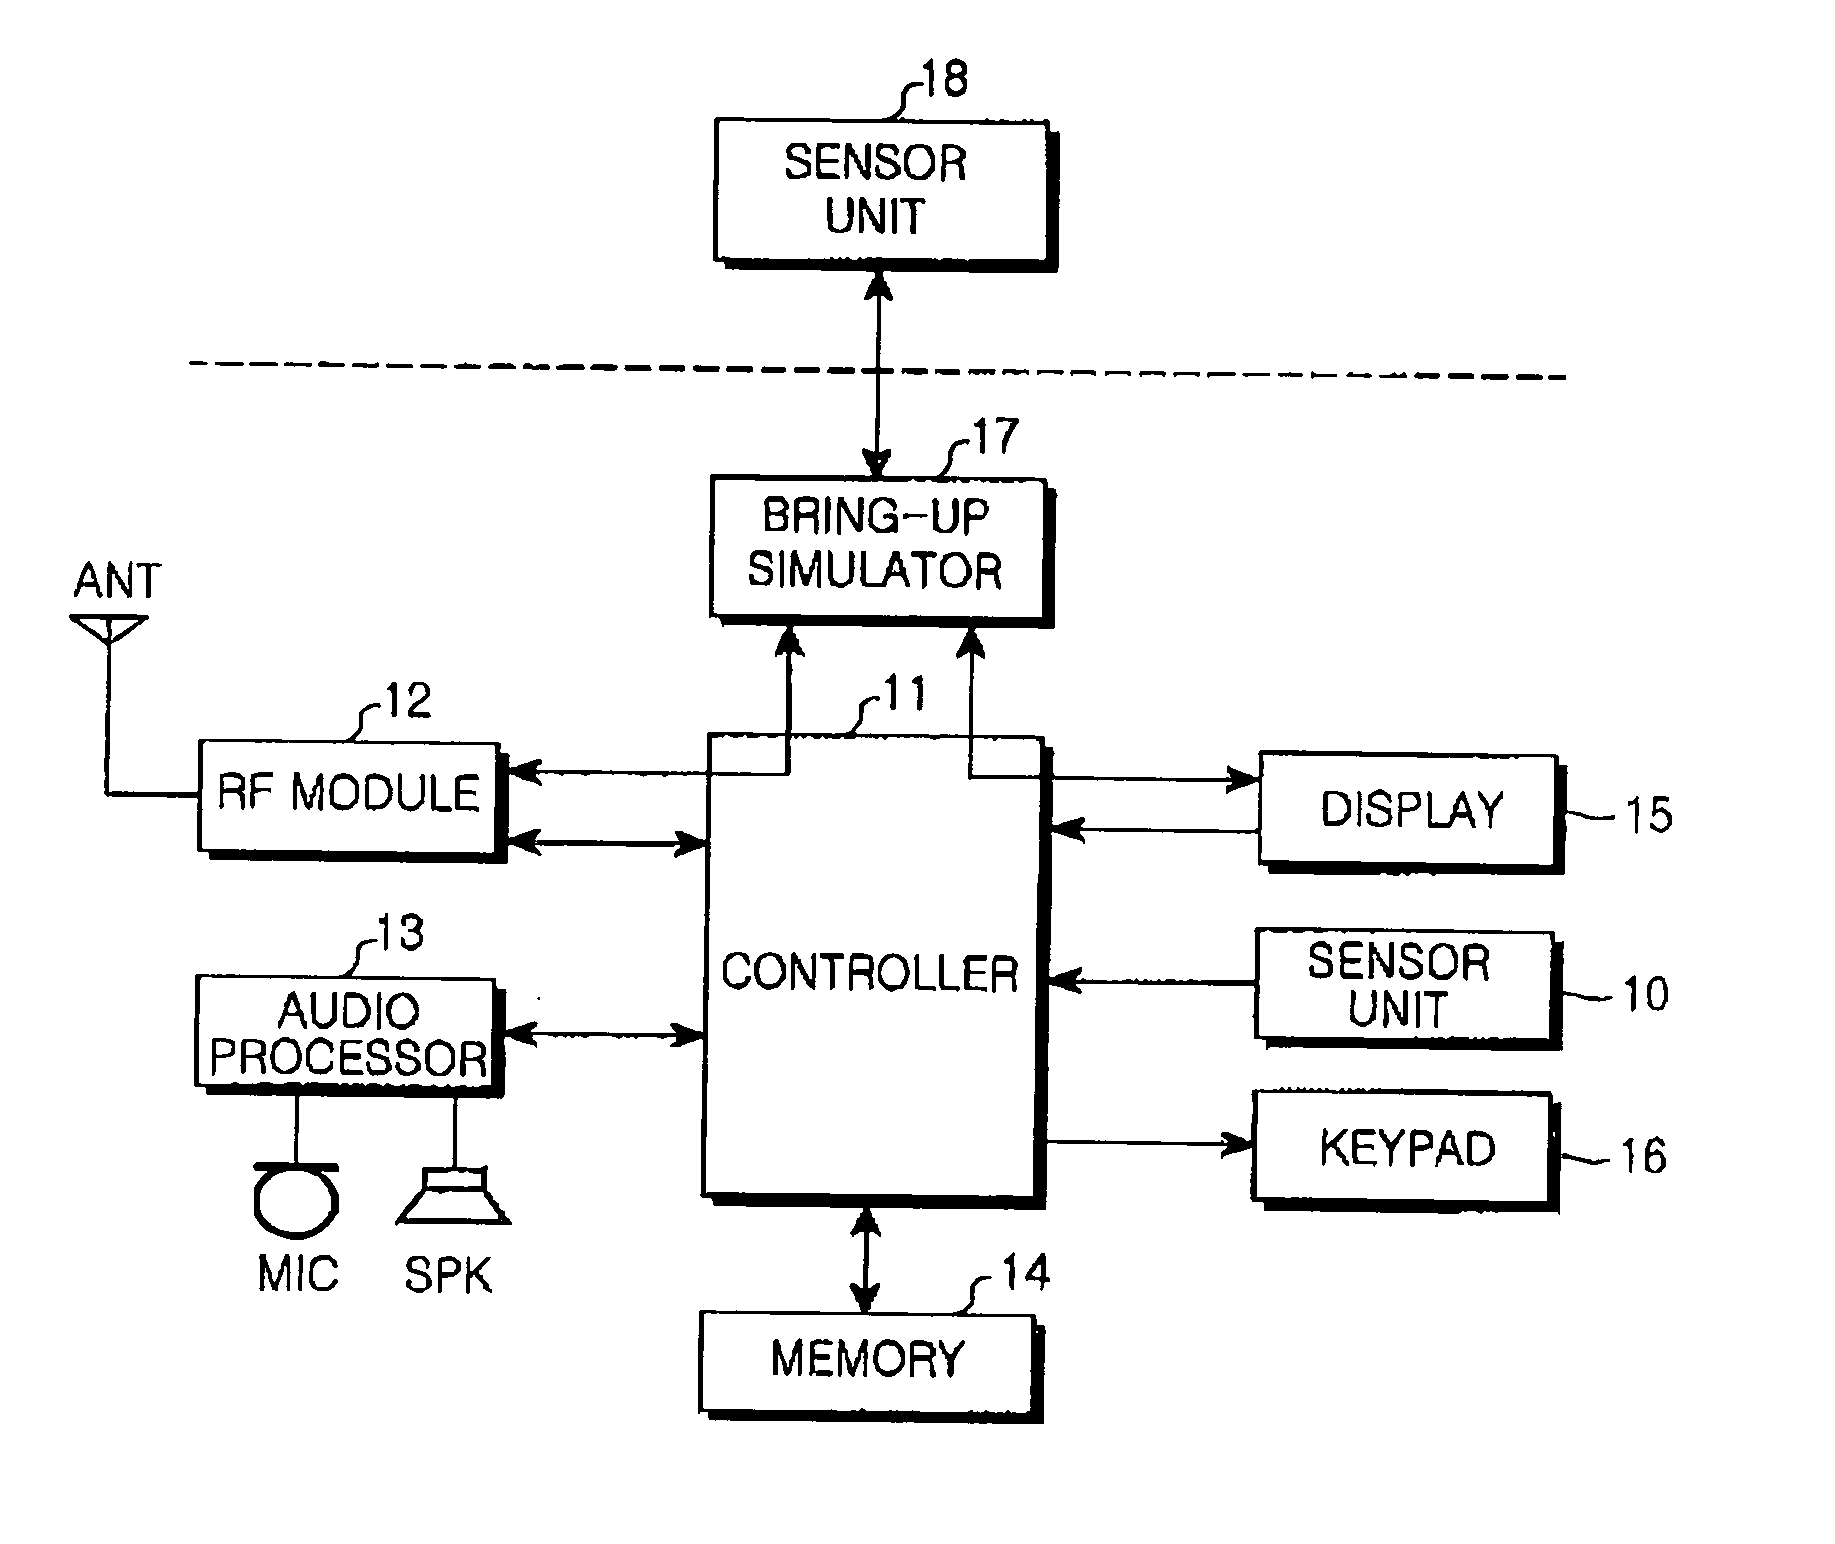 Method and apparatus for performing bringup simulation in a mobile terminal